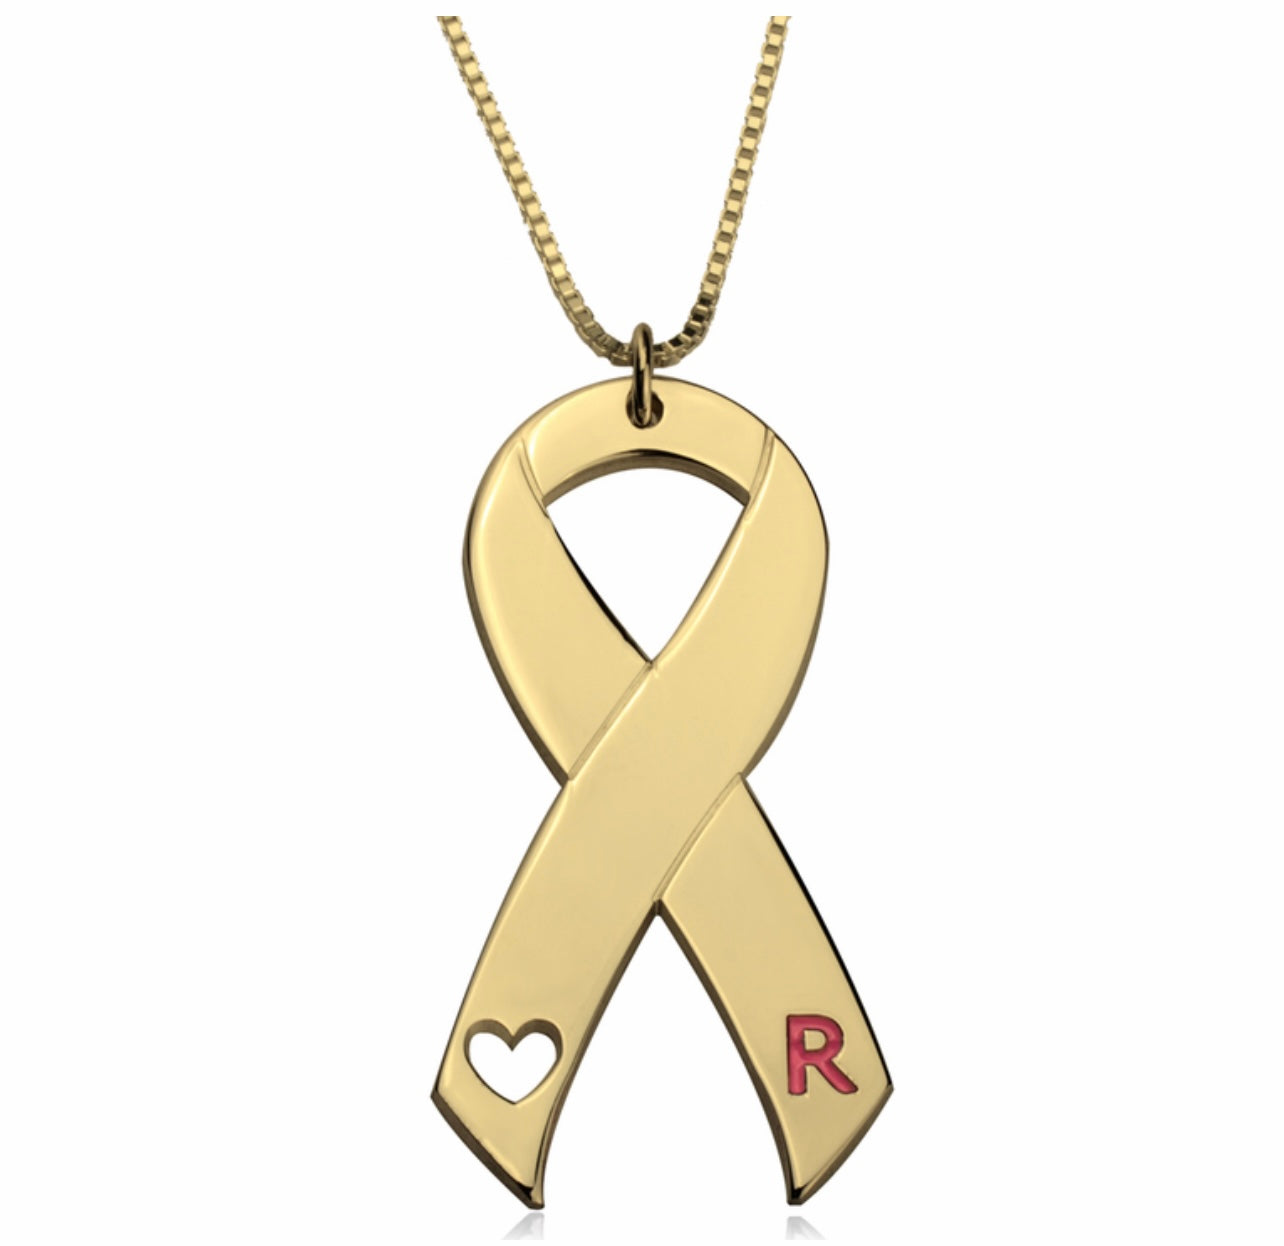 Strength in Pink Initial Ribbon Necklace